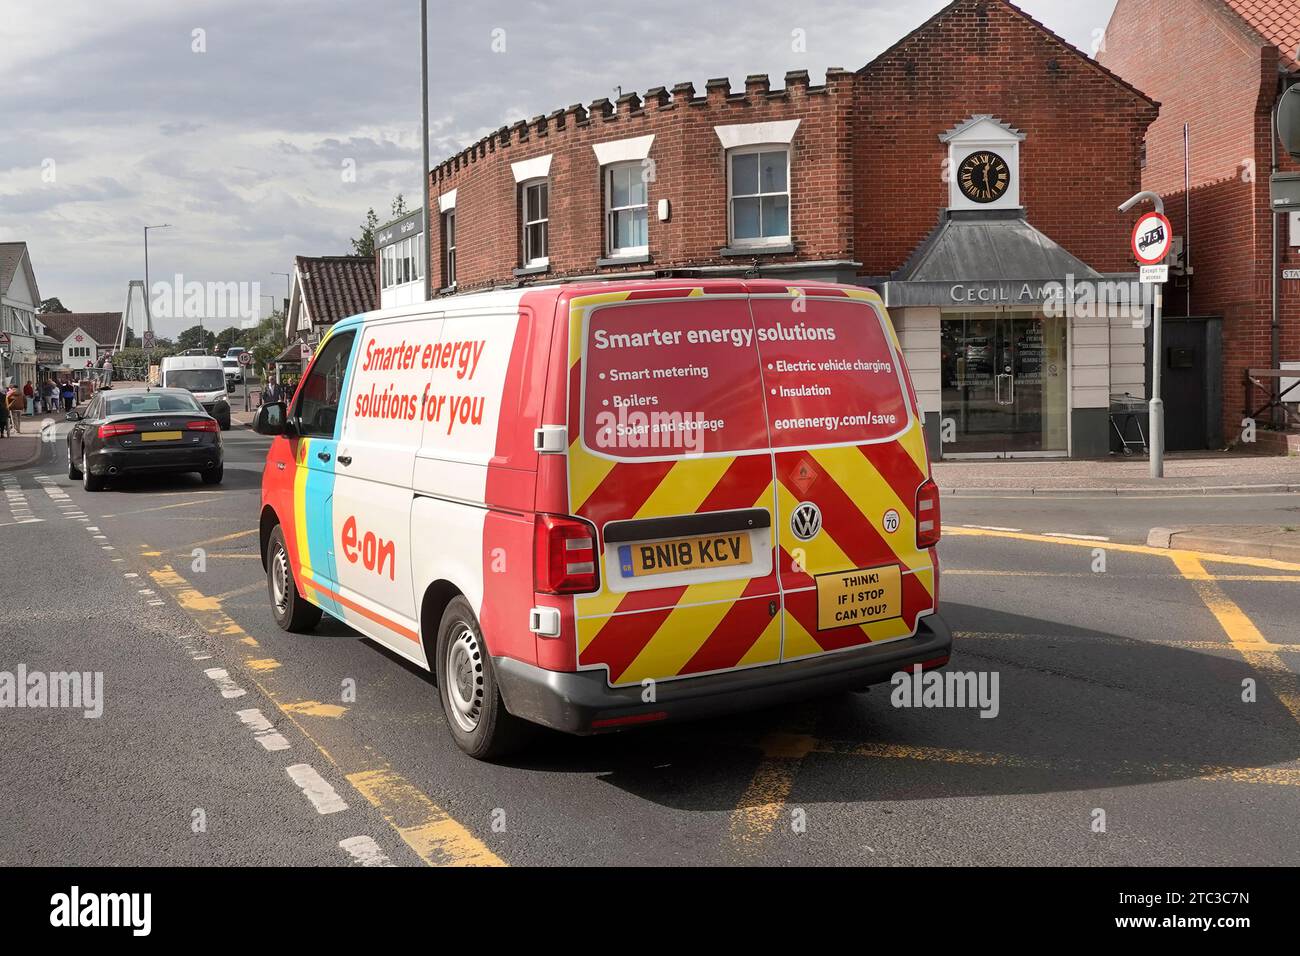 E on plc Mercedes van operated by residential and business electricity and gas supply energy company driving across box junction in Wroxham Norfolk UK Stock Photo